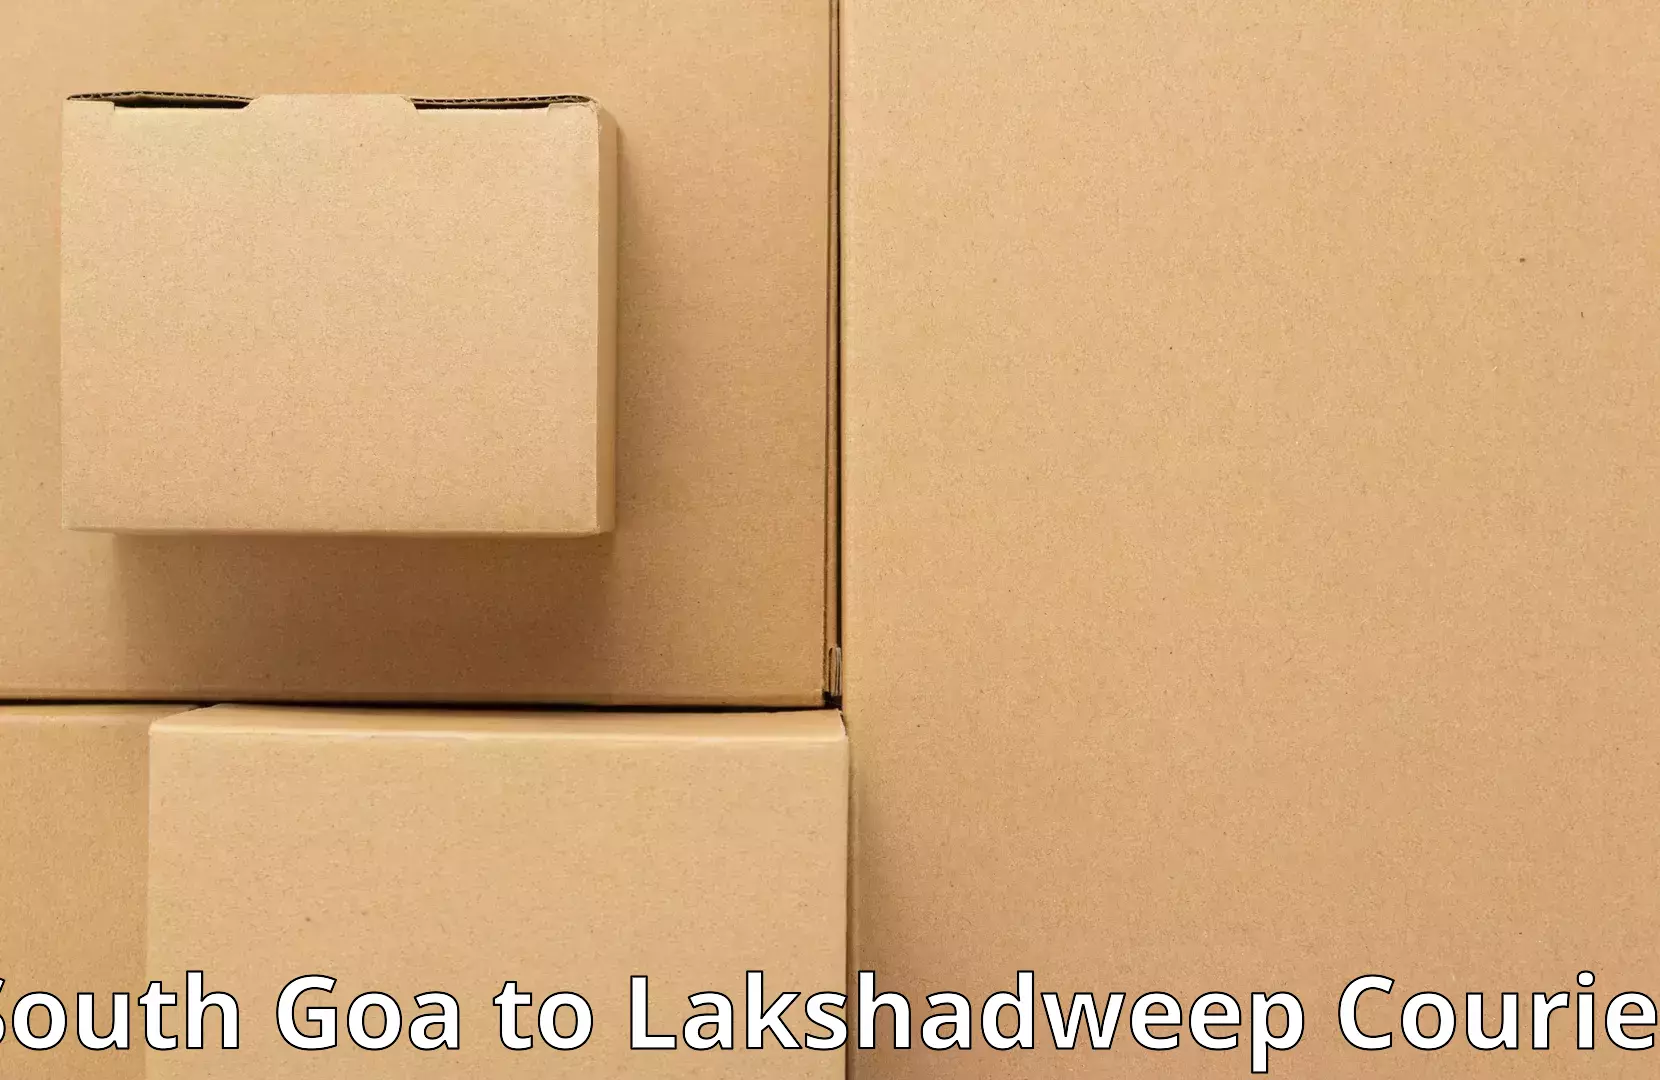 Skilled furniture movers South Goa to Lakshadweep